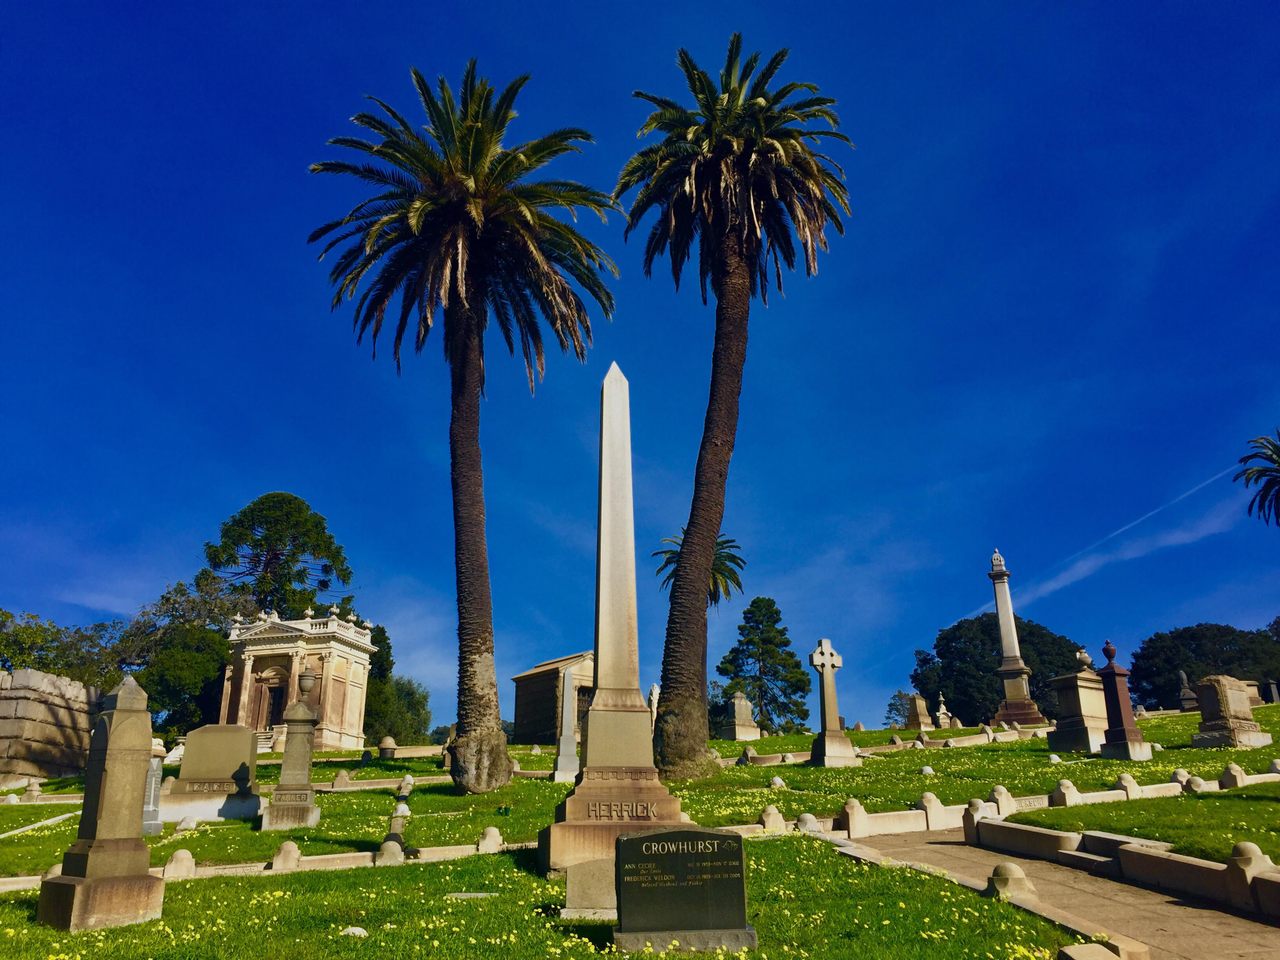 Clara Loeper's remains were buried at—and stolen from—Mountain View Cemetery in Oakland, California.